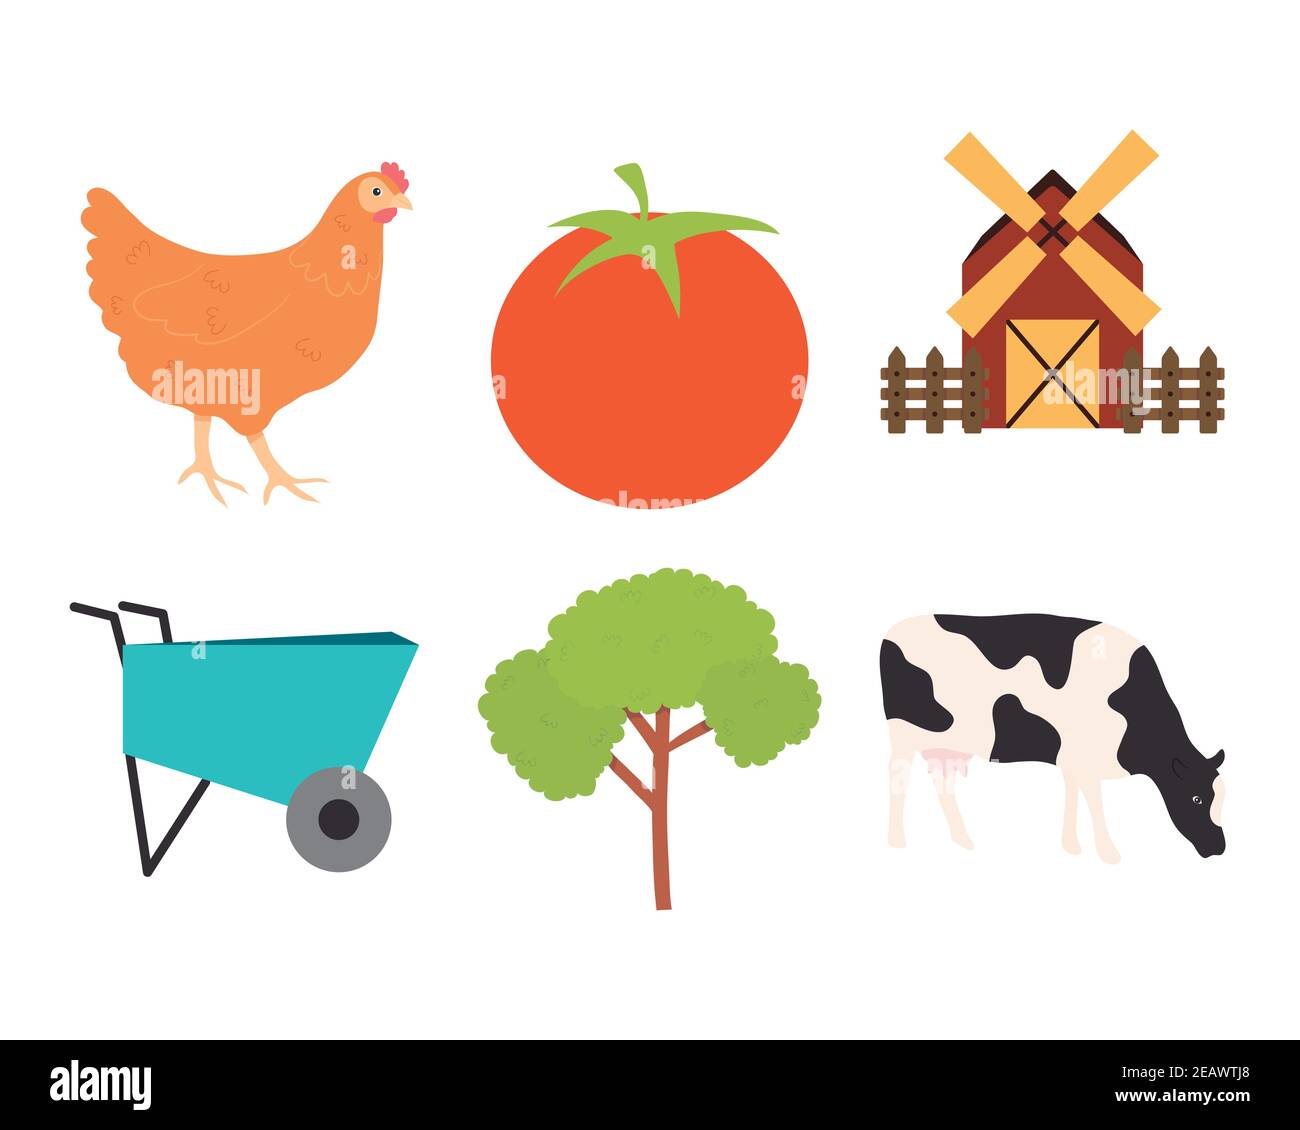 animals and farm icon set over white background, colorful design, vector illustration Stock Vector